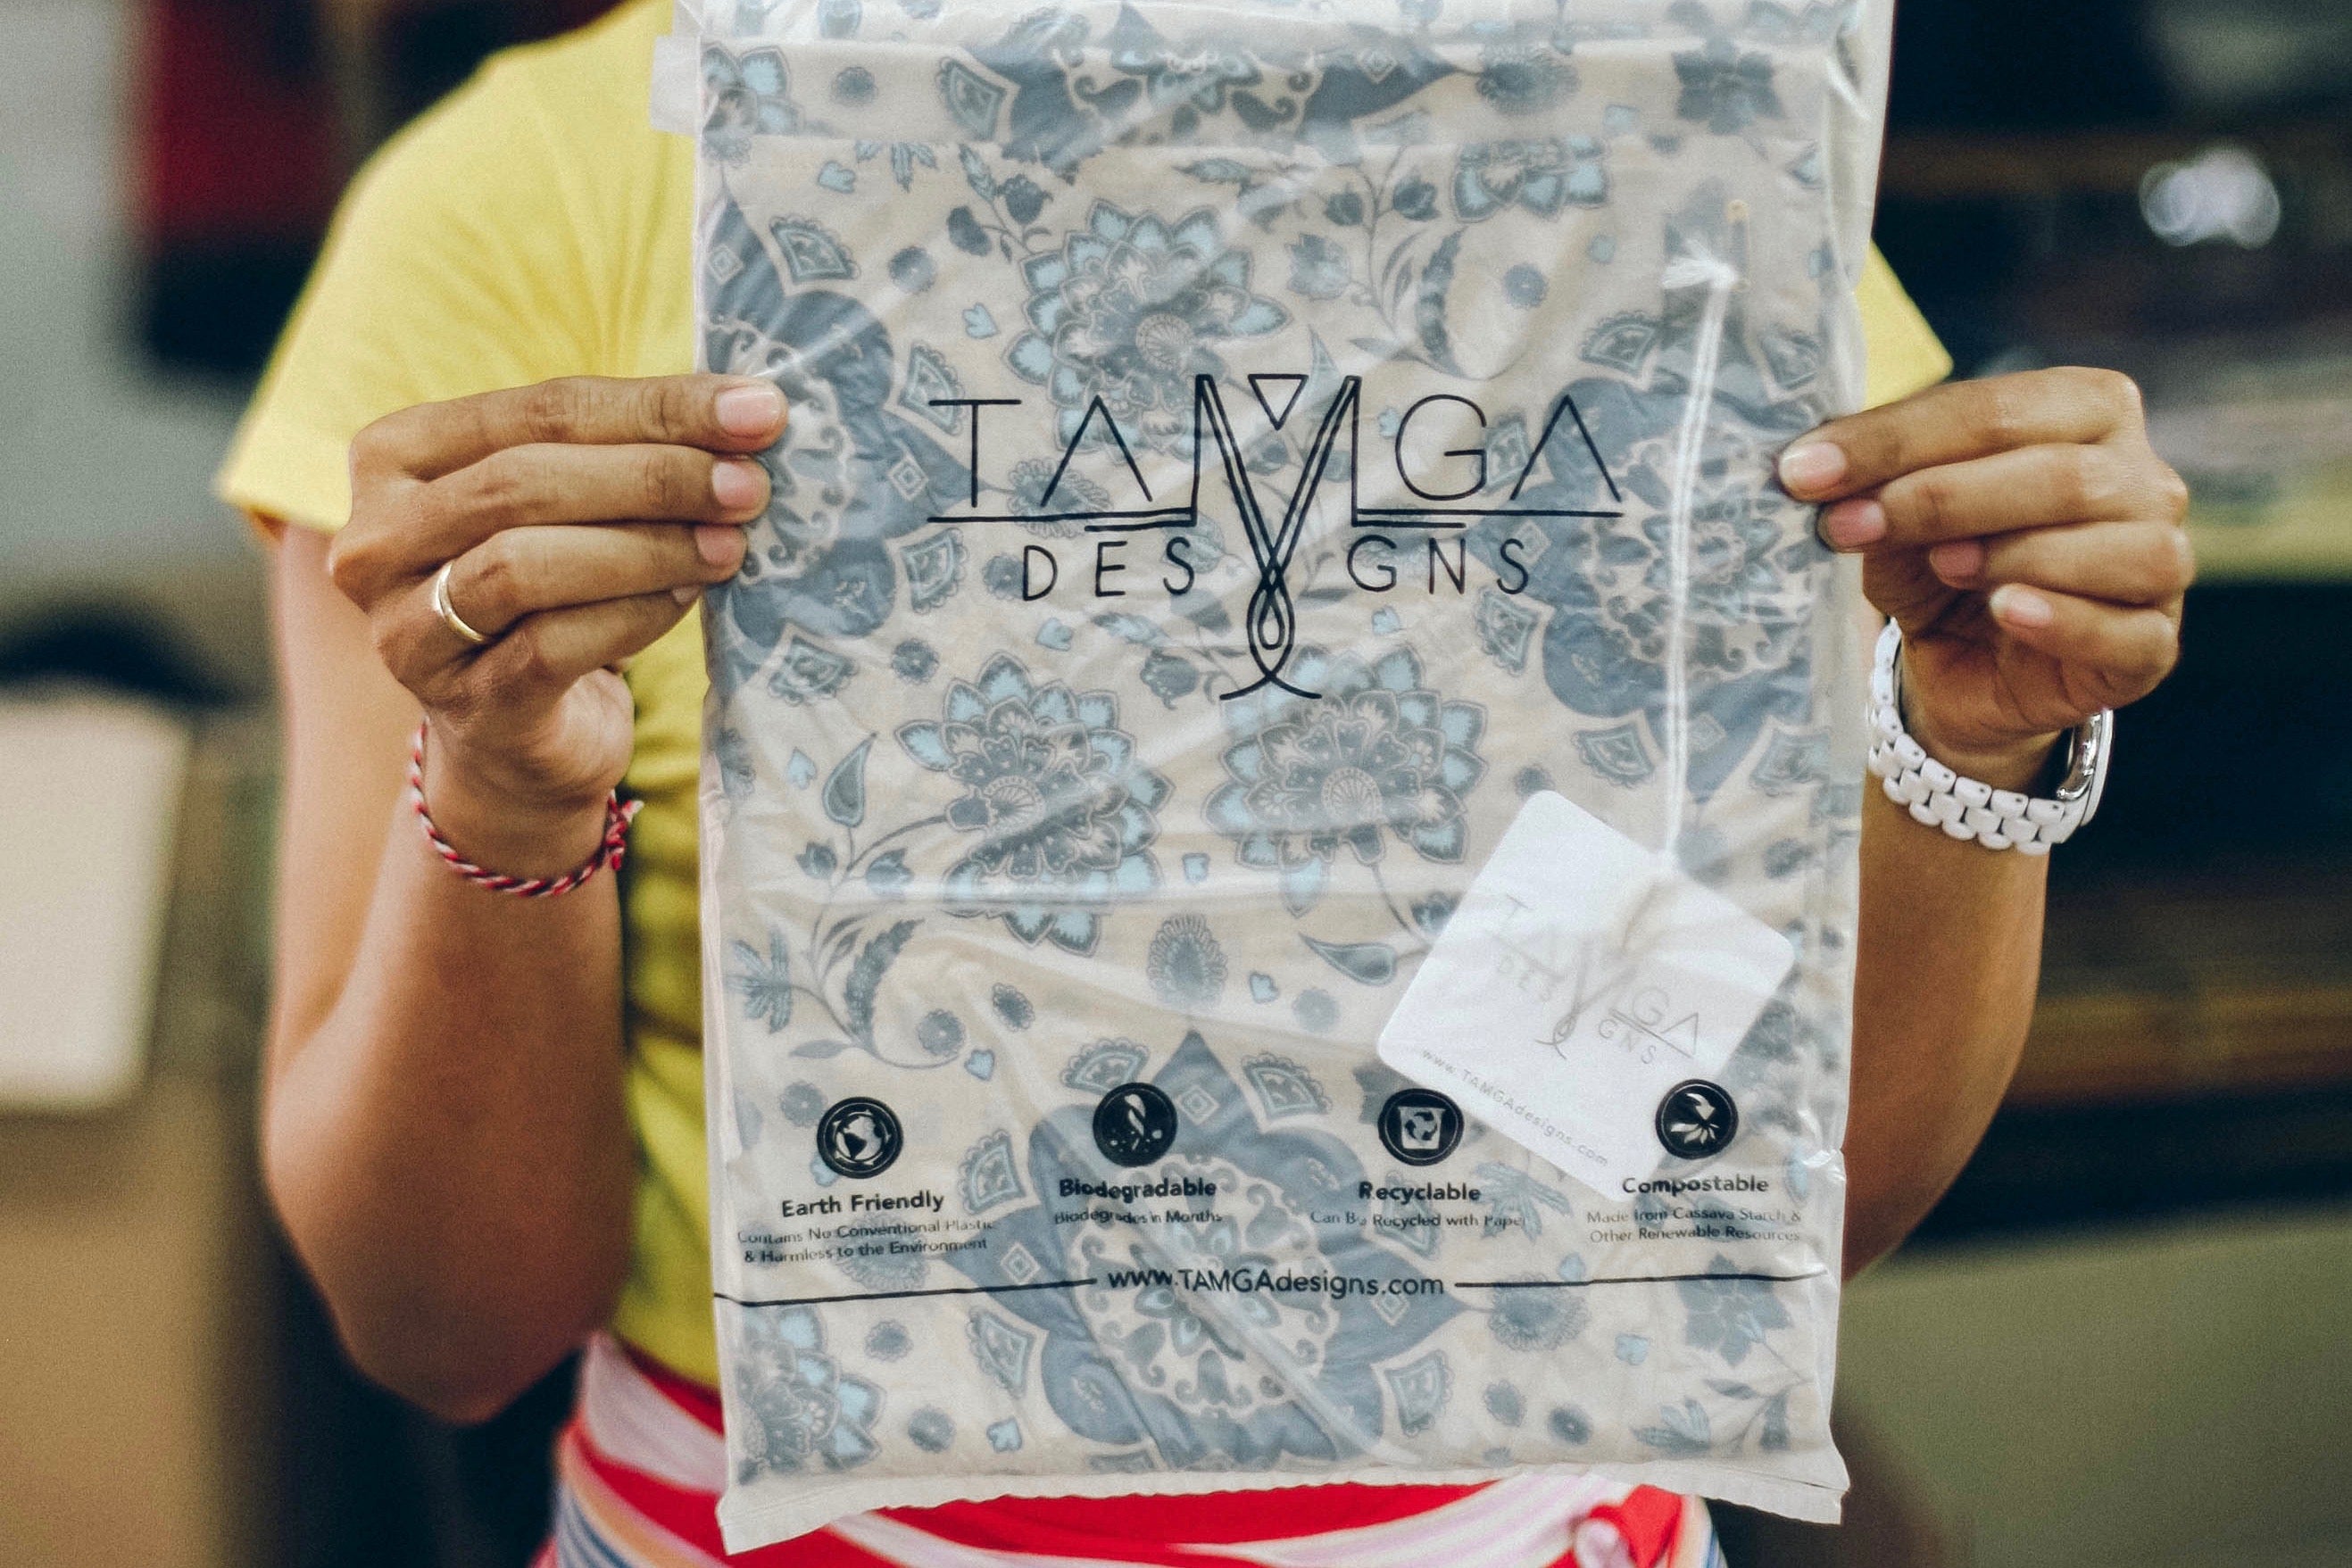 Compostable and biodegradable garment bags used by TAMGA Designs.